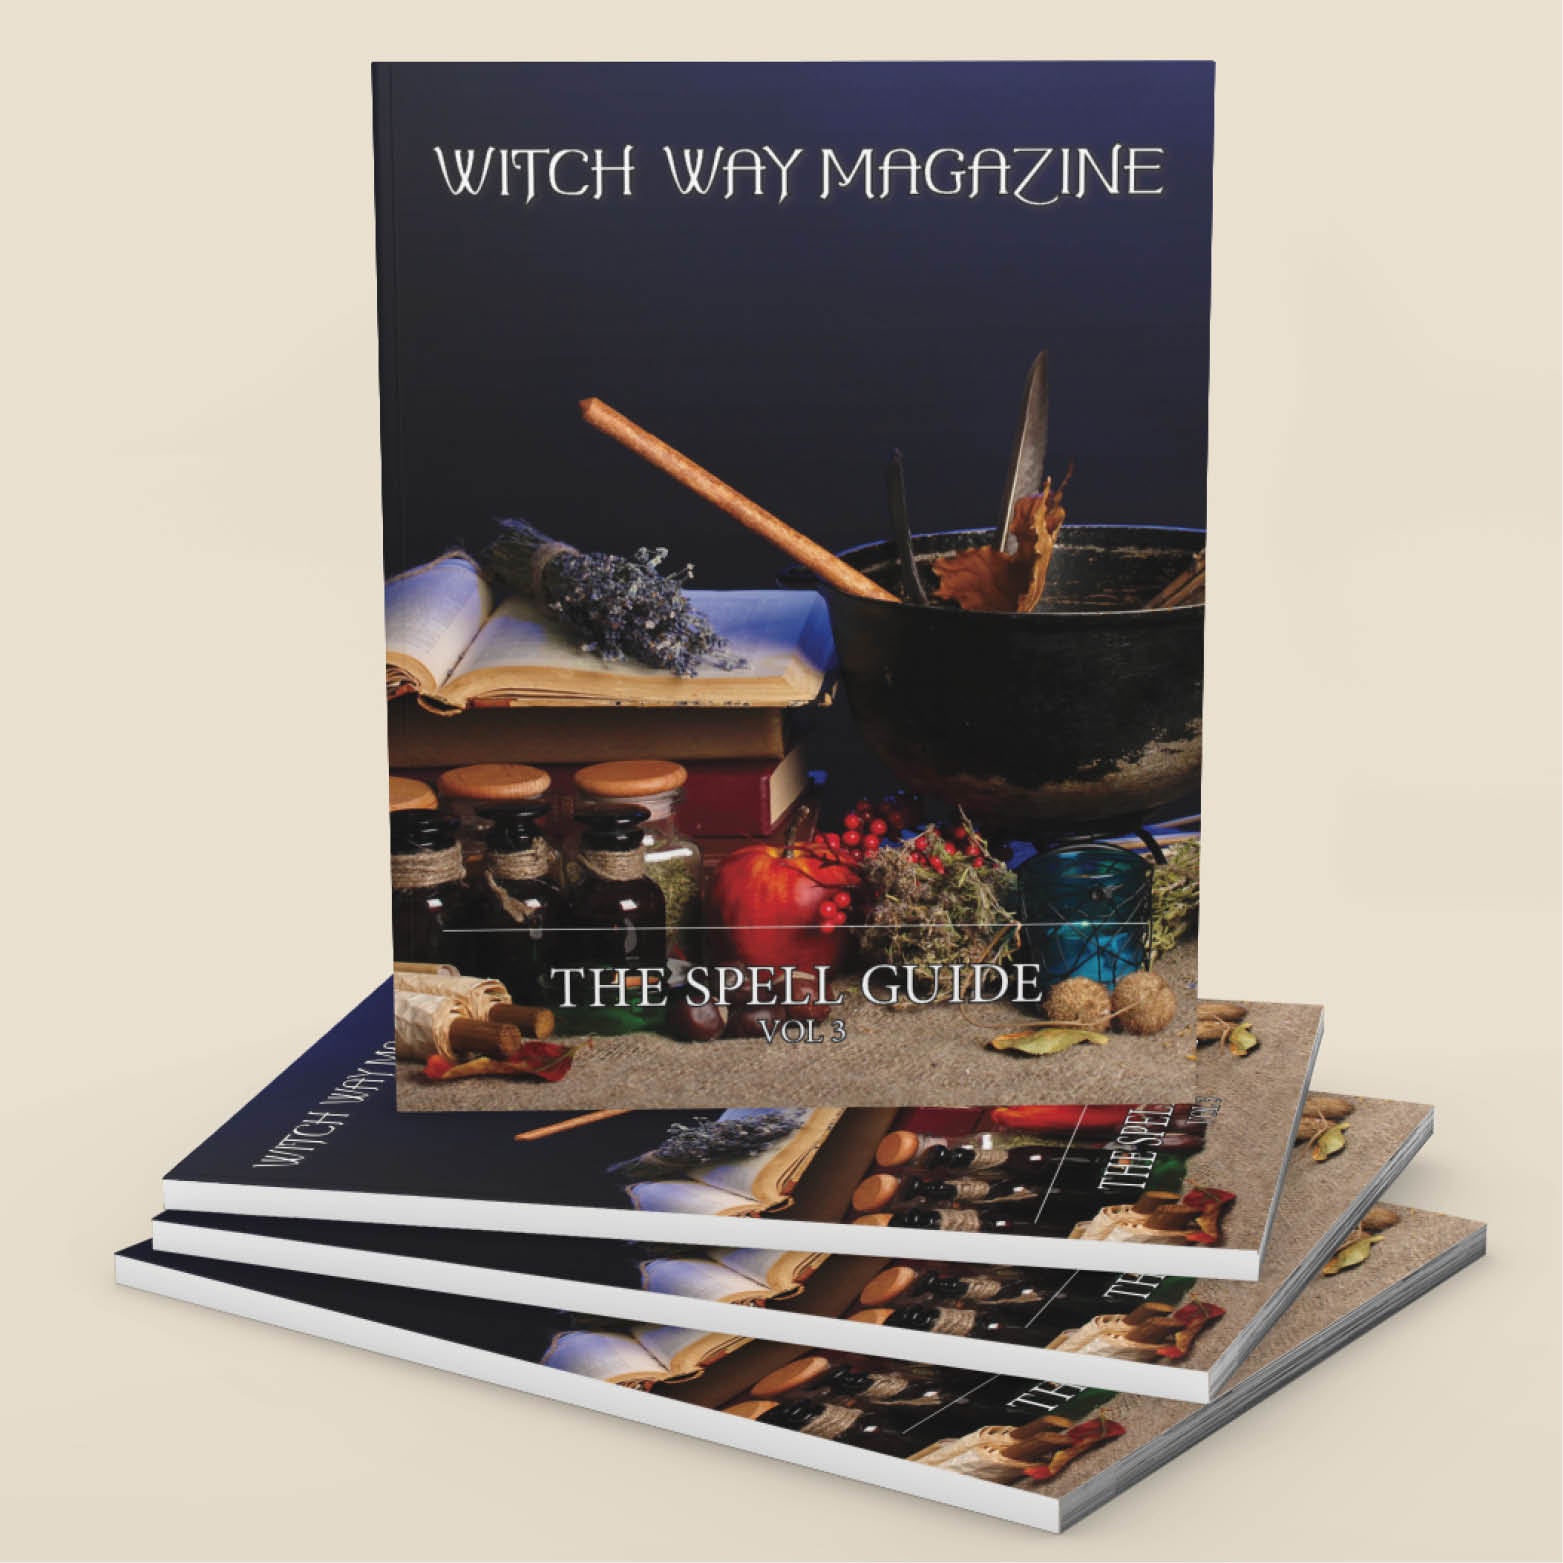 Witch Way Magazine 2018 Spell  Guide -  Vol 3 - Printed